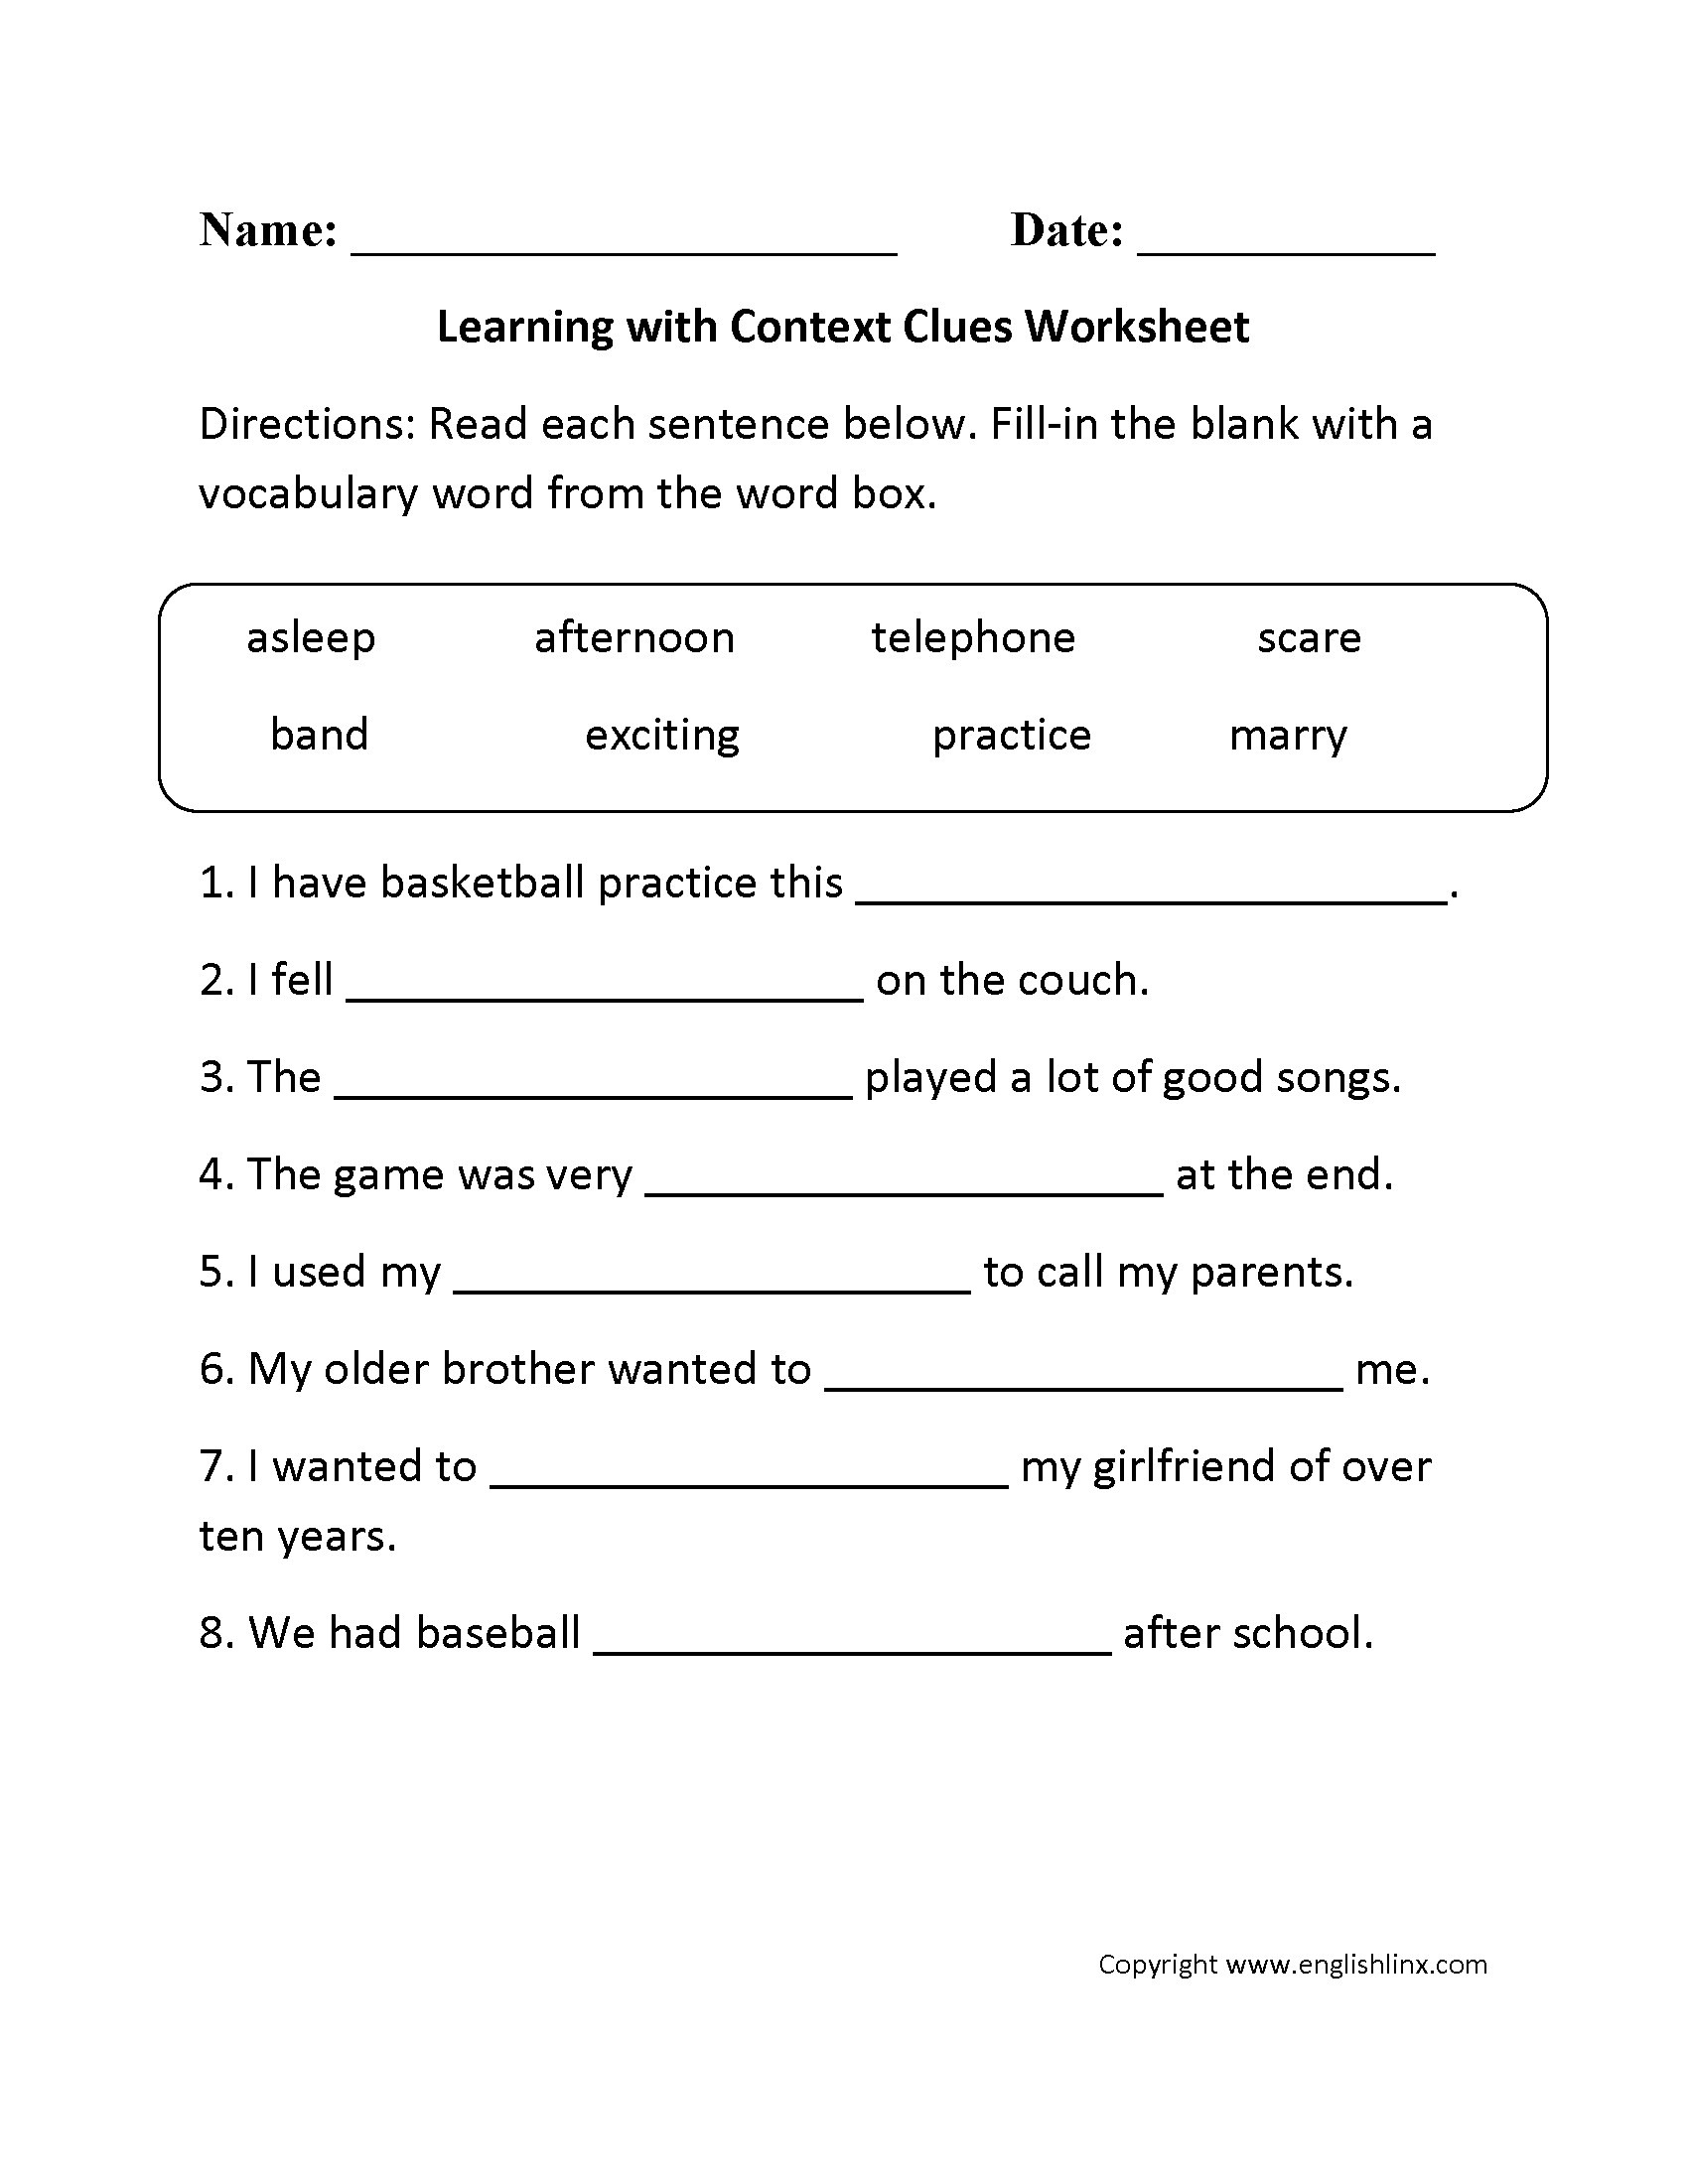 worksheet-ideas-free-english-worksheets-3rd-grade-for-db-excel